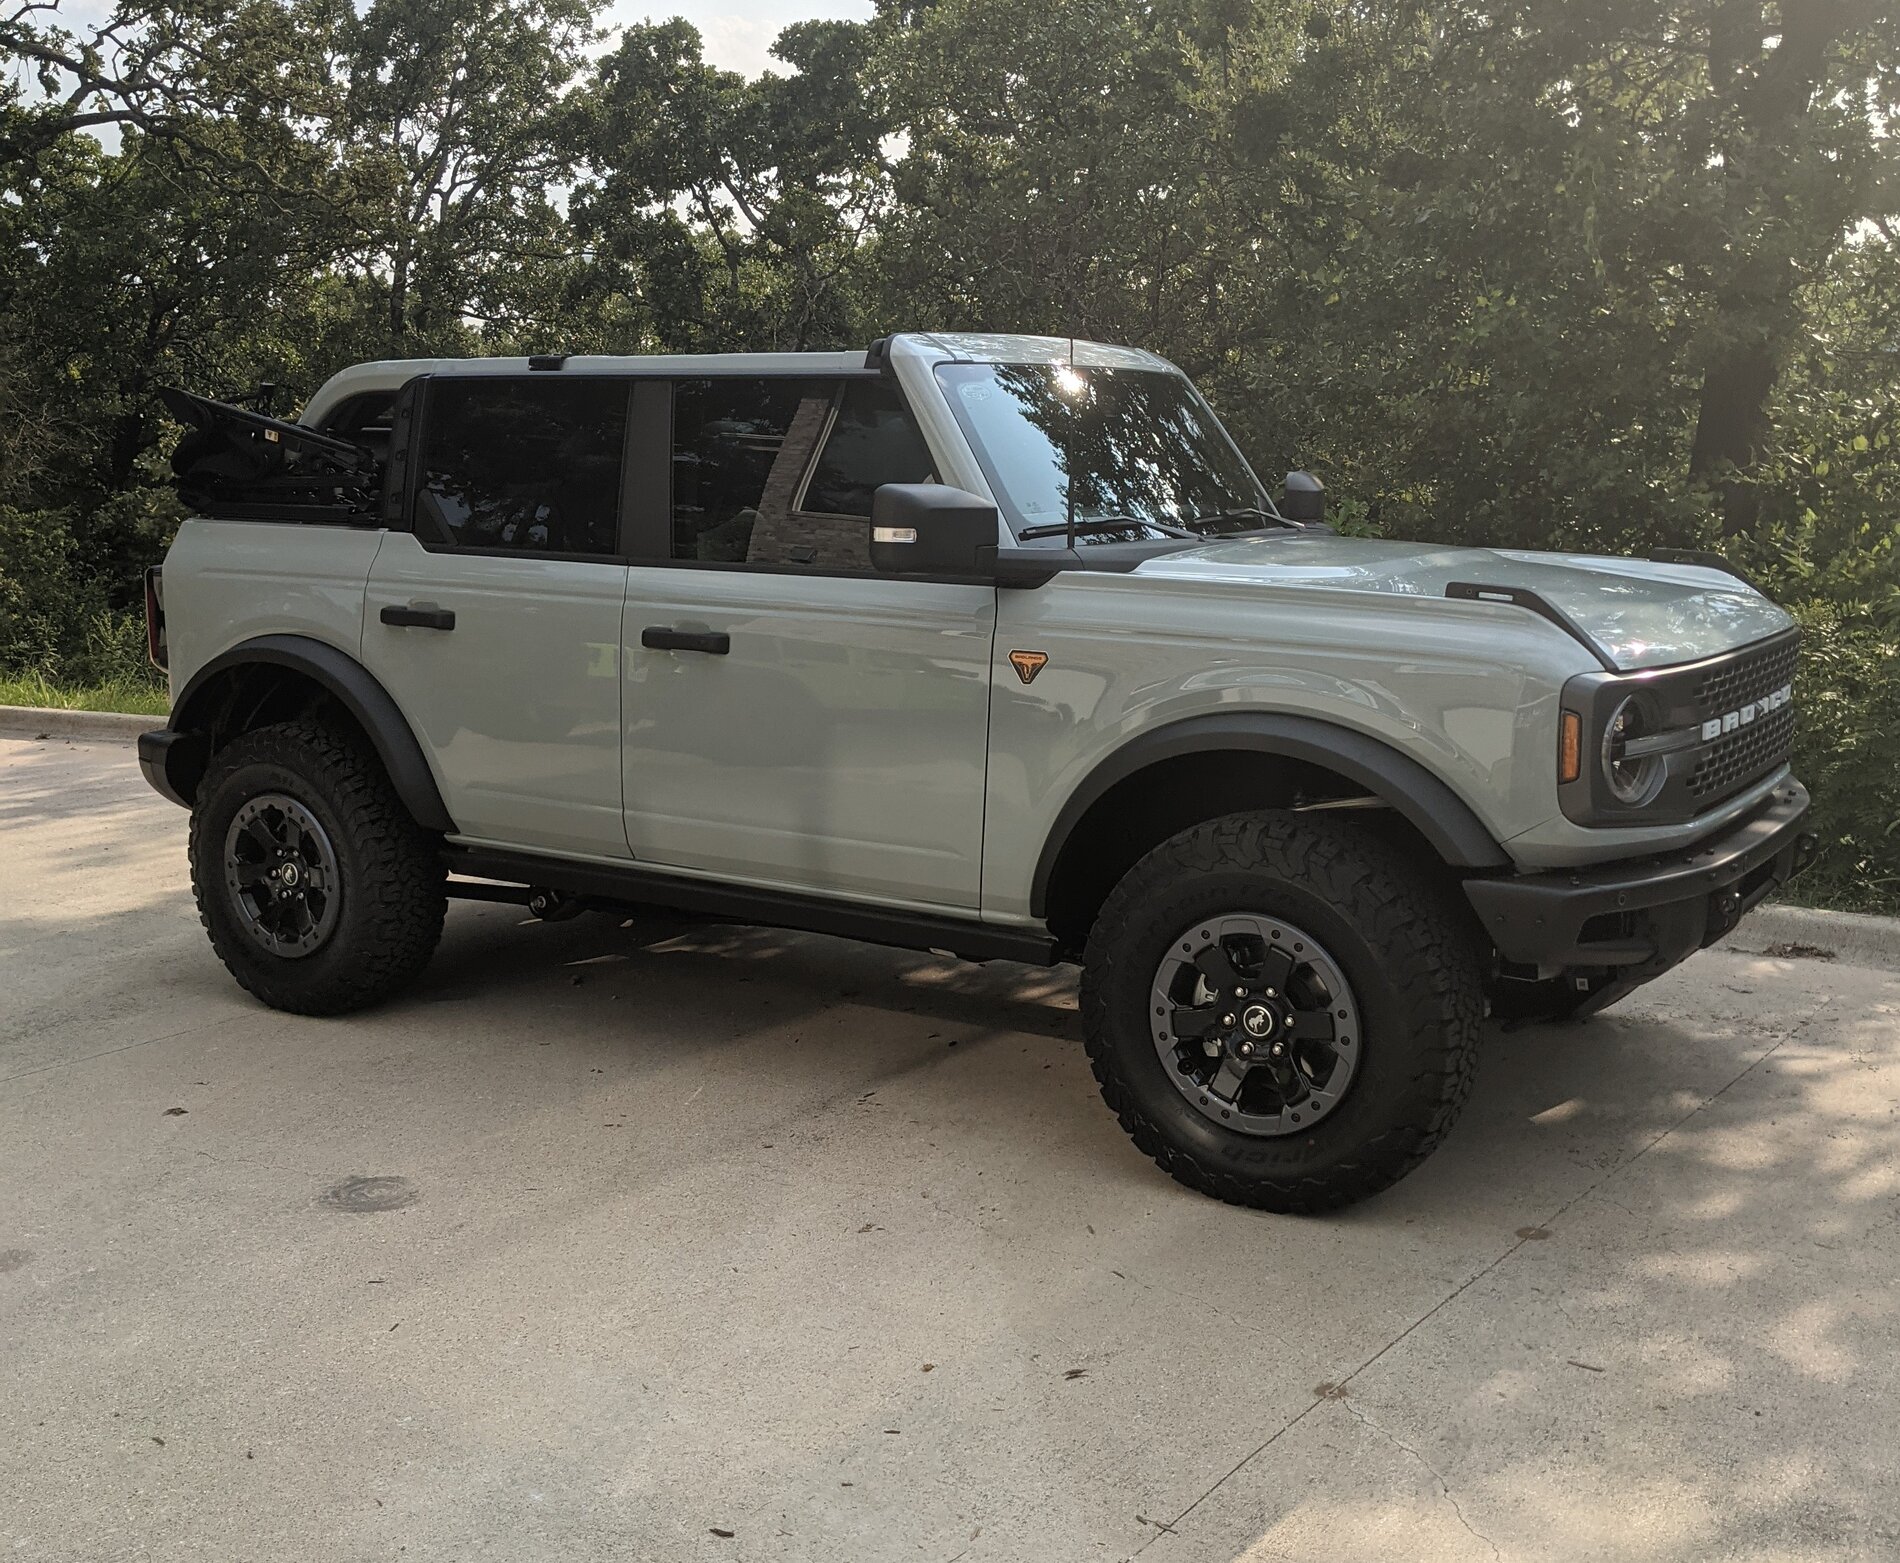 Ford Bronco BlueBroncos Review of the Accidental Order “get-it-now” Cactus Gray Build PXL_20210805_225014444~2